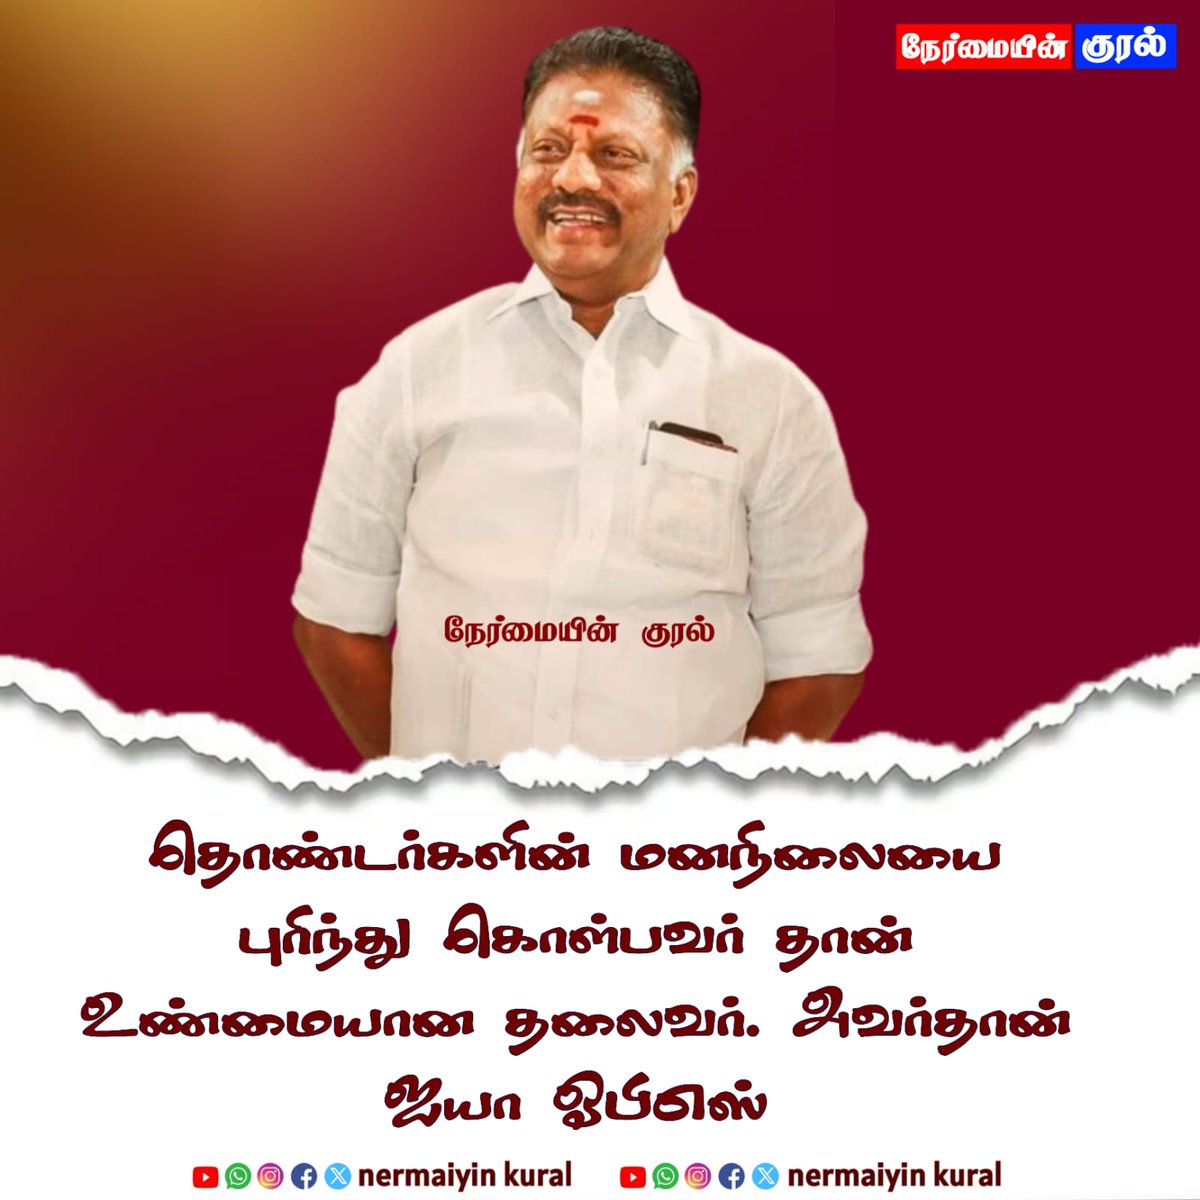 #AIADMKChiefOPS #OPS_For_Ramnad